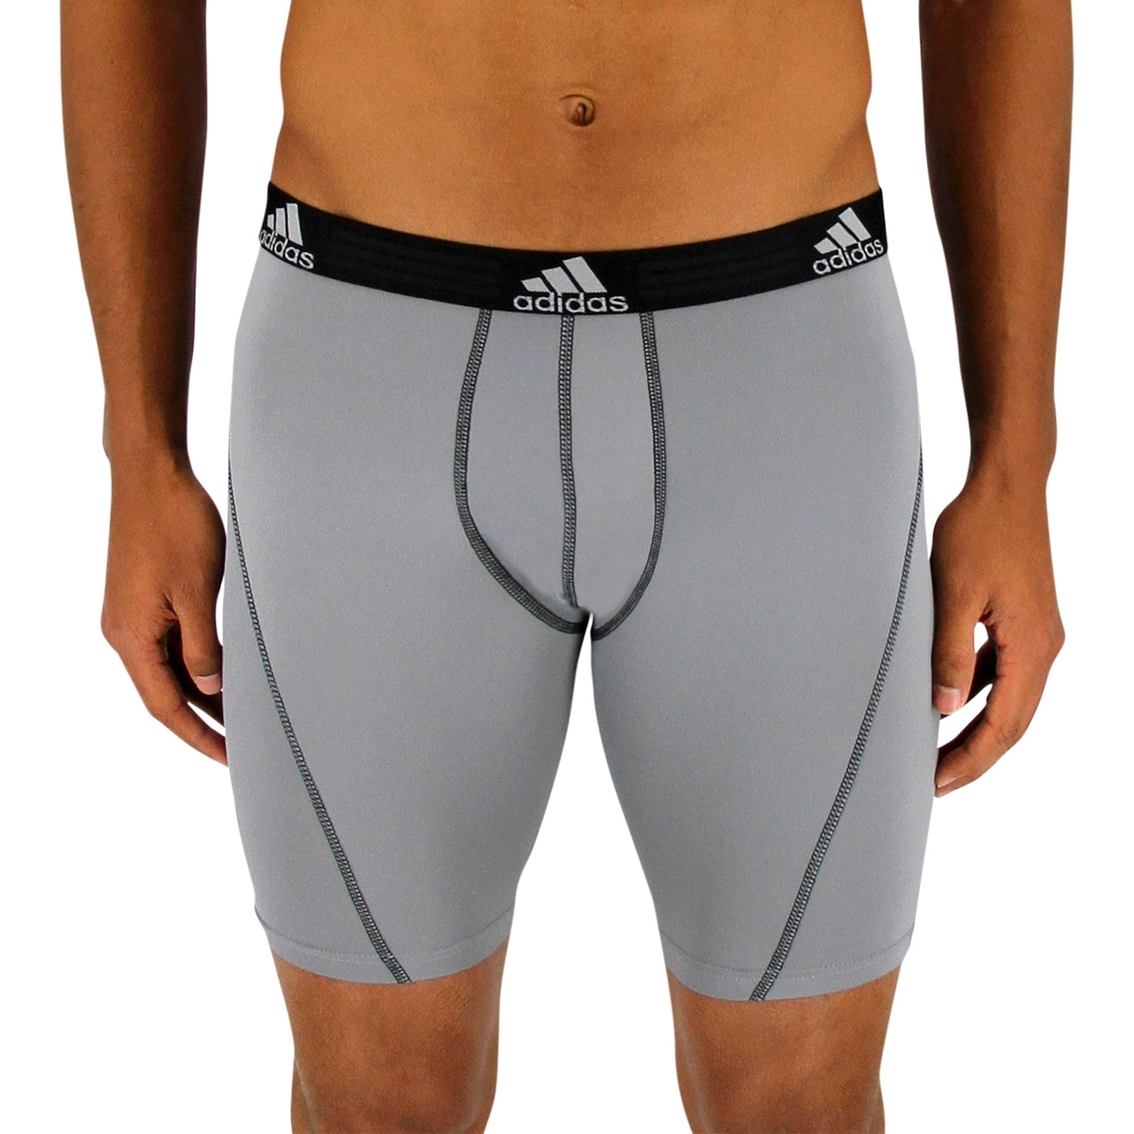 adidas Sport Performance Climalite Midway Brief 2 pk. - Image 2 of 2